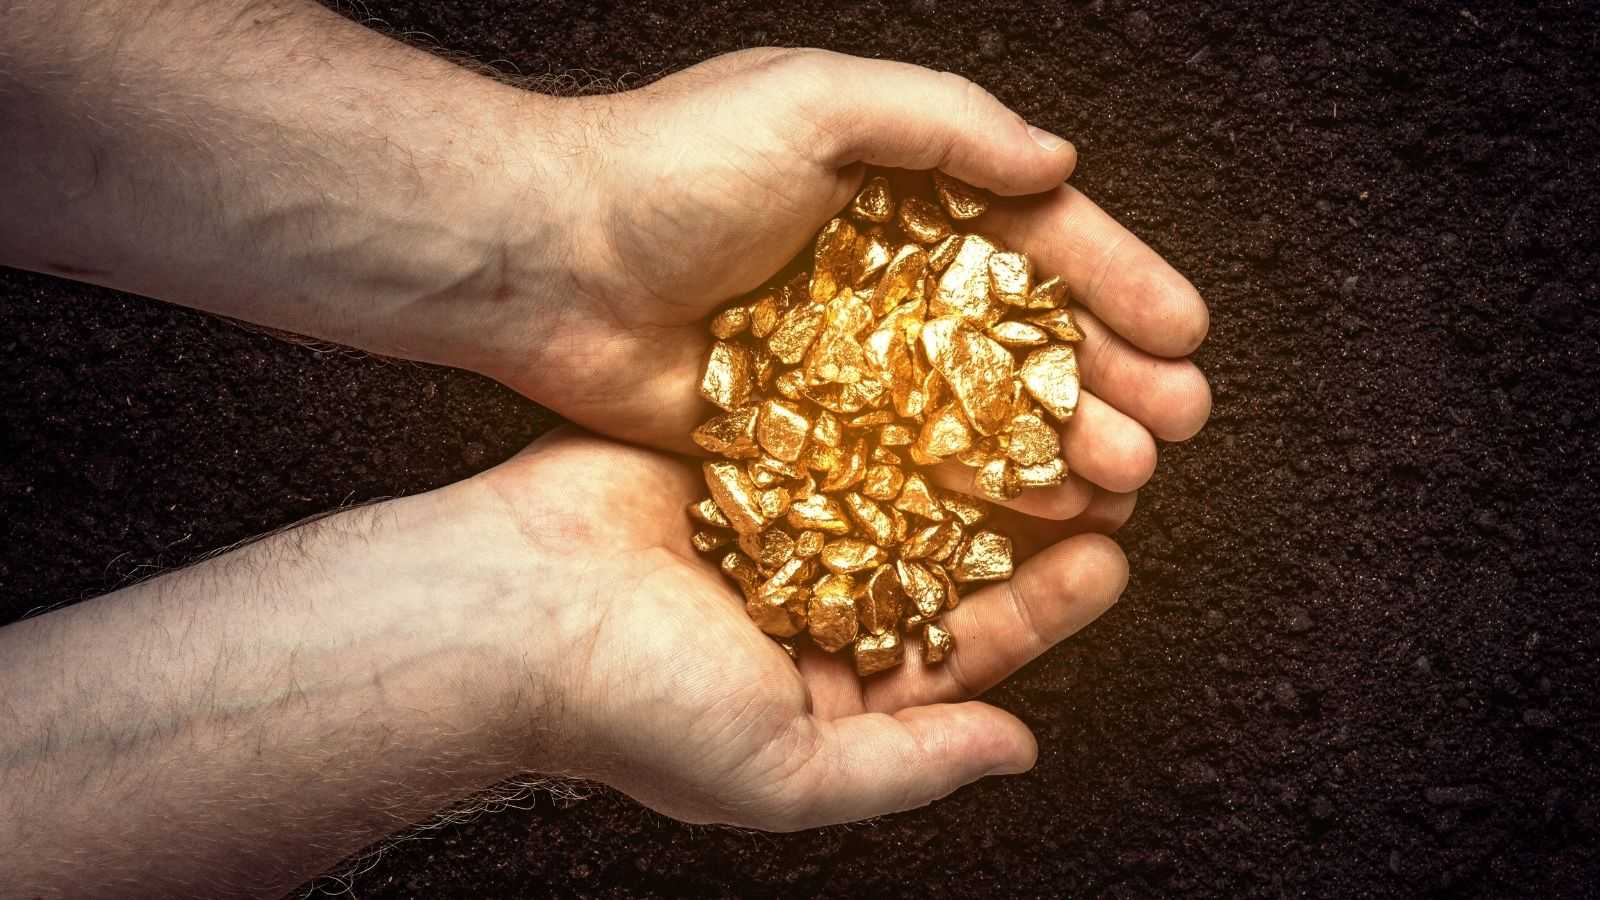 Tapping into a rich seam: the case for gold miners